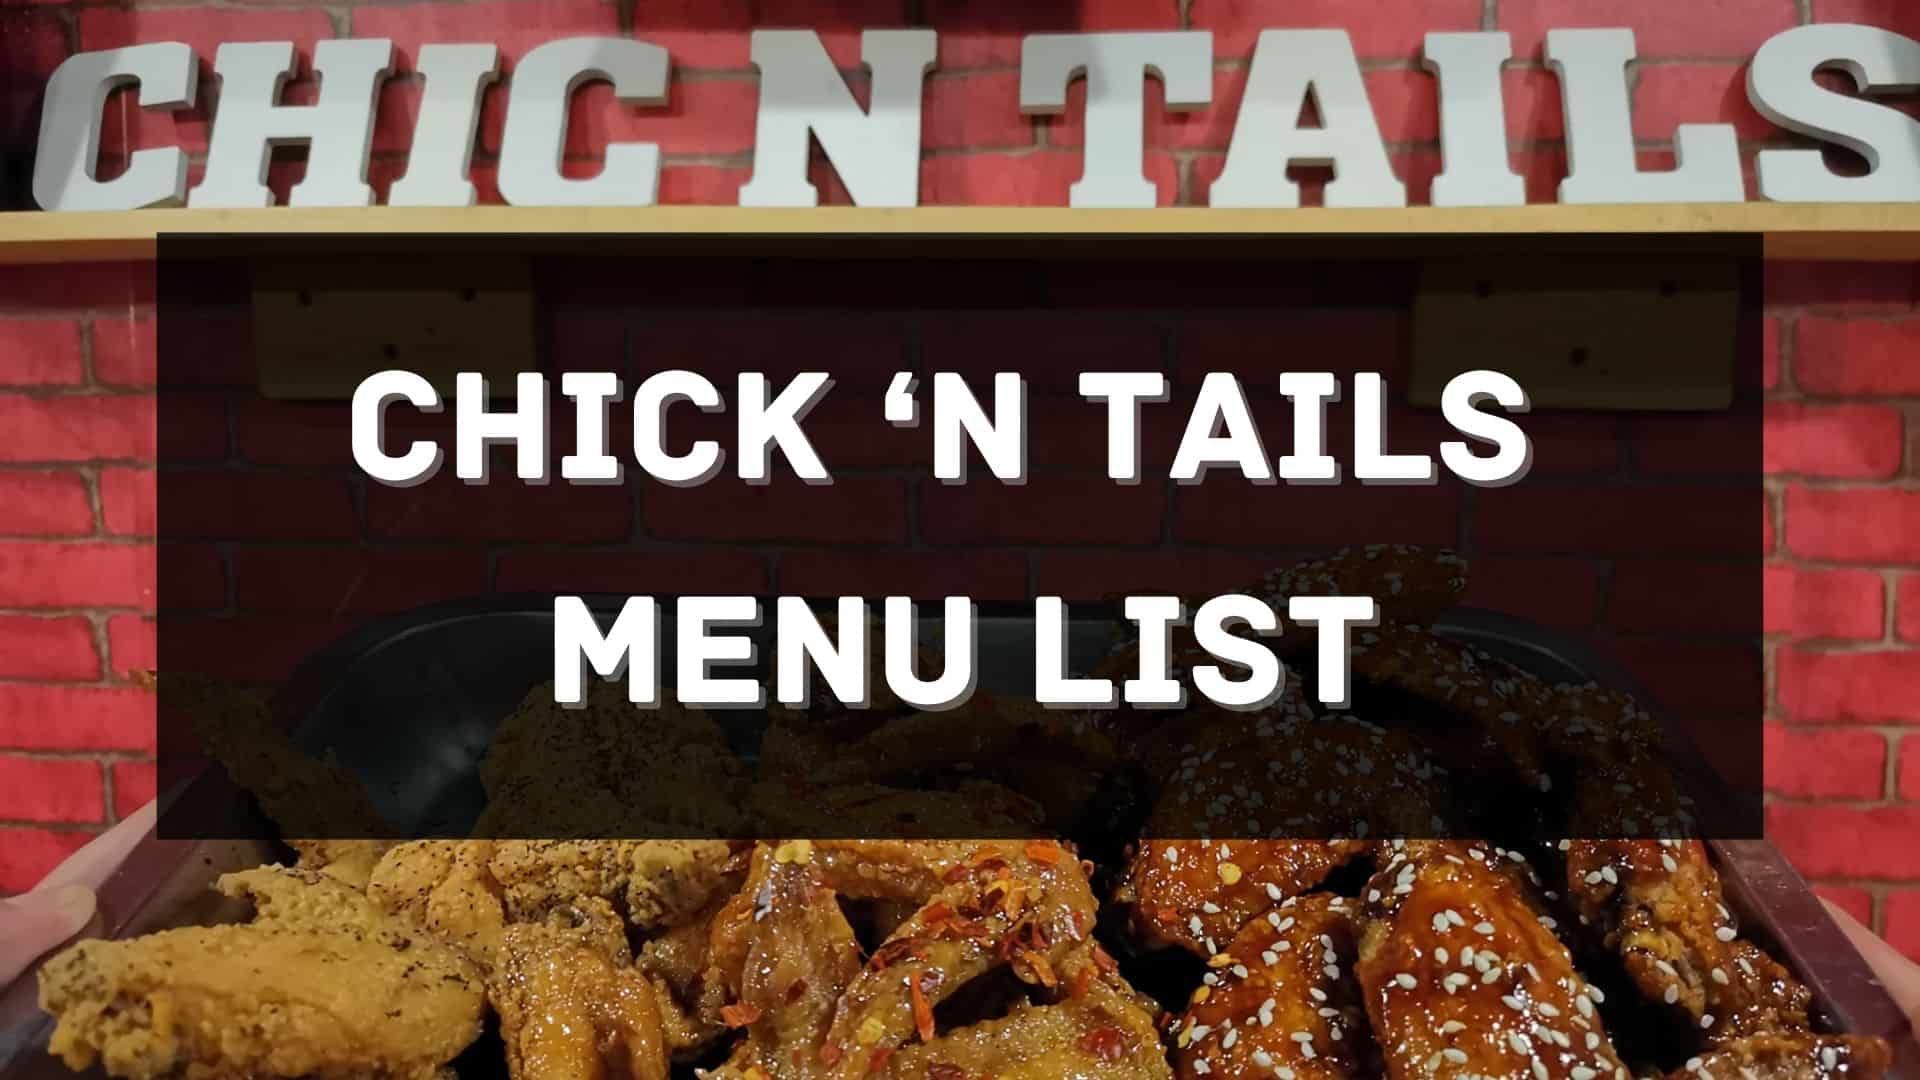 chick 'n tails menu prices philippines